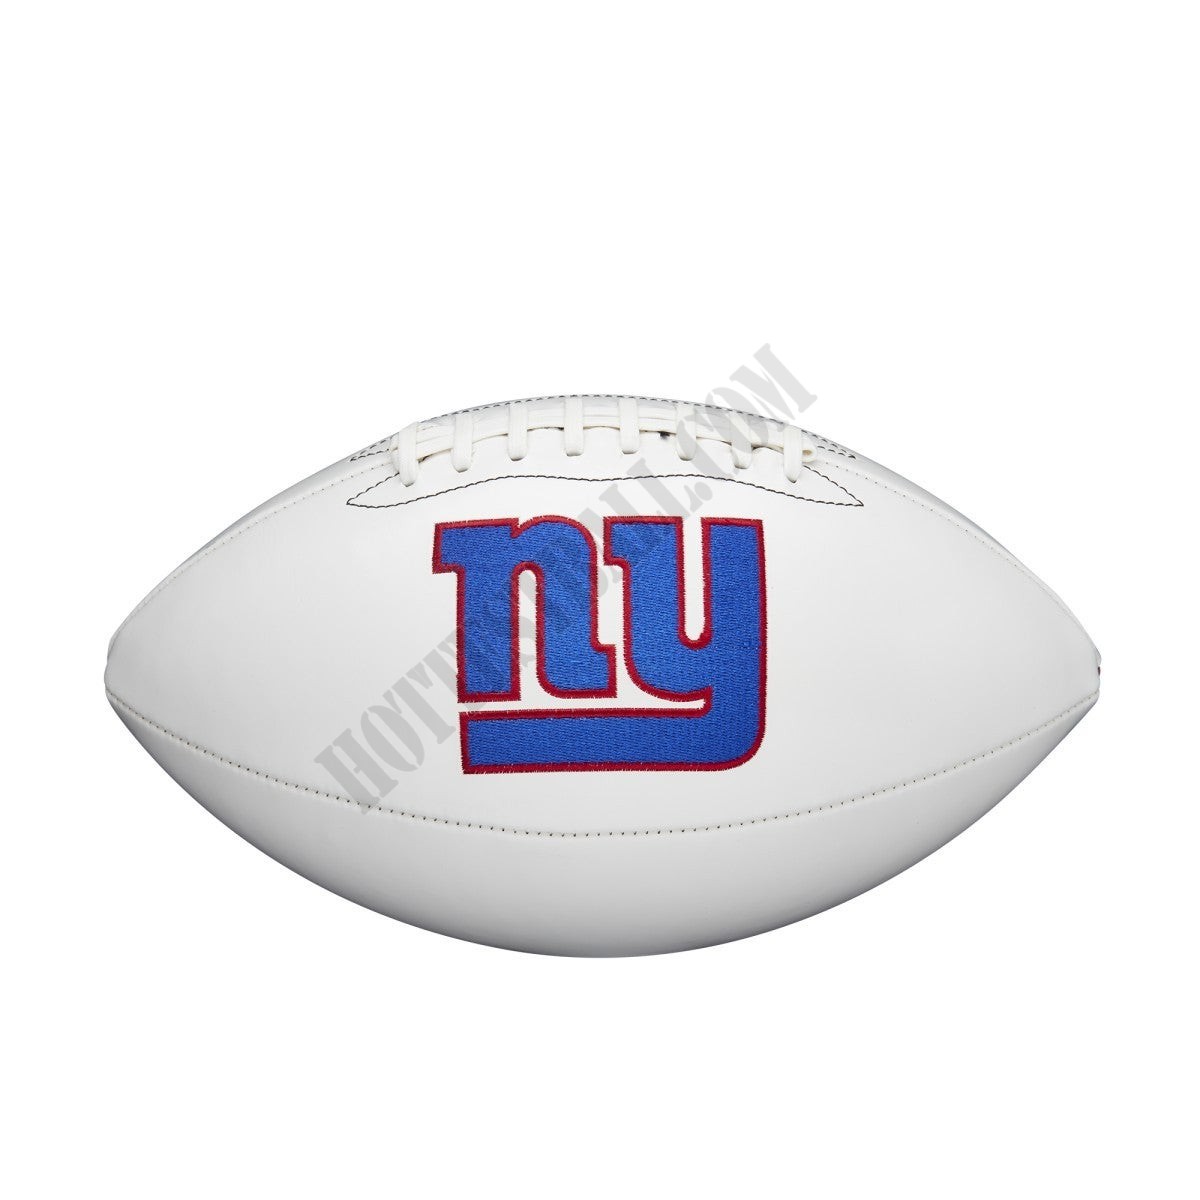 NFL Live Signature Autograph Football - New York Giants ● Wilson Promotions - -0